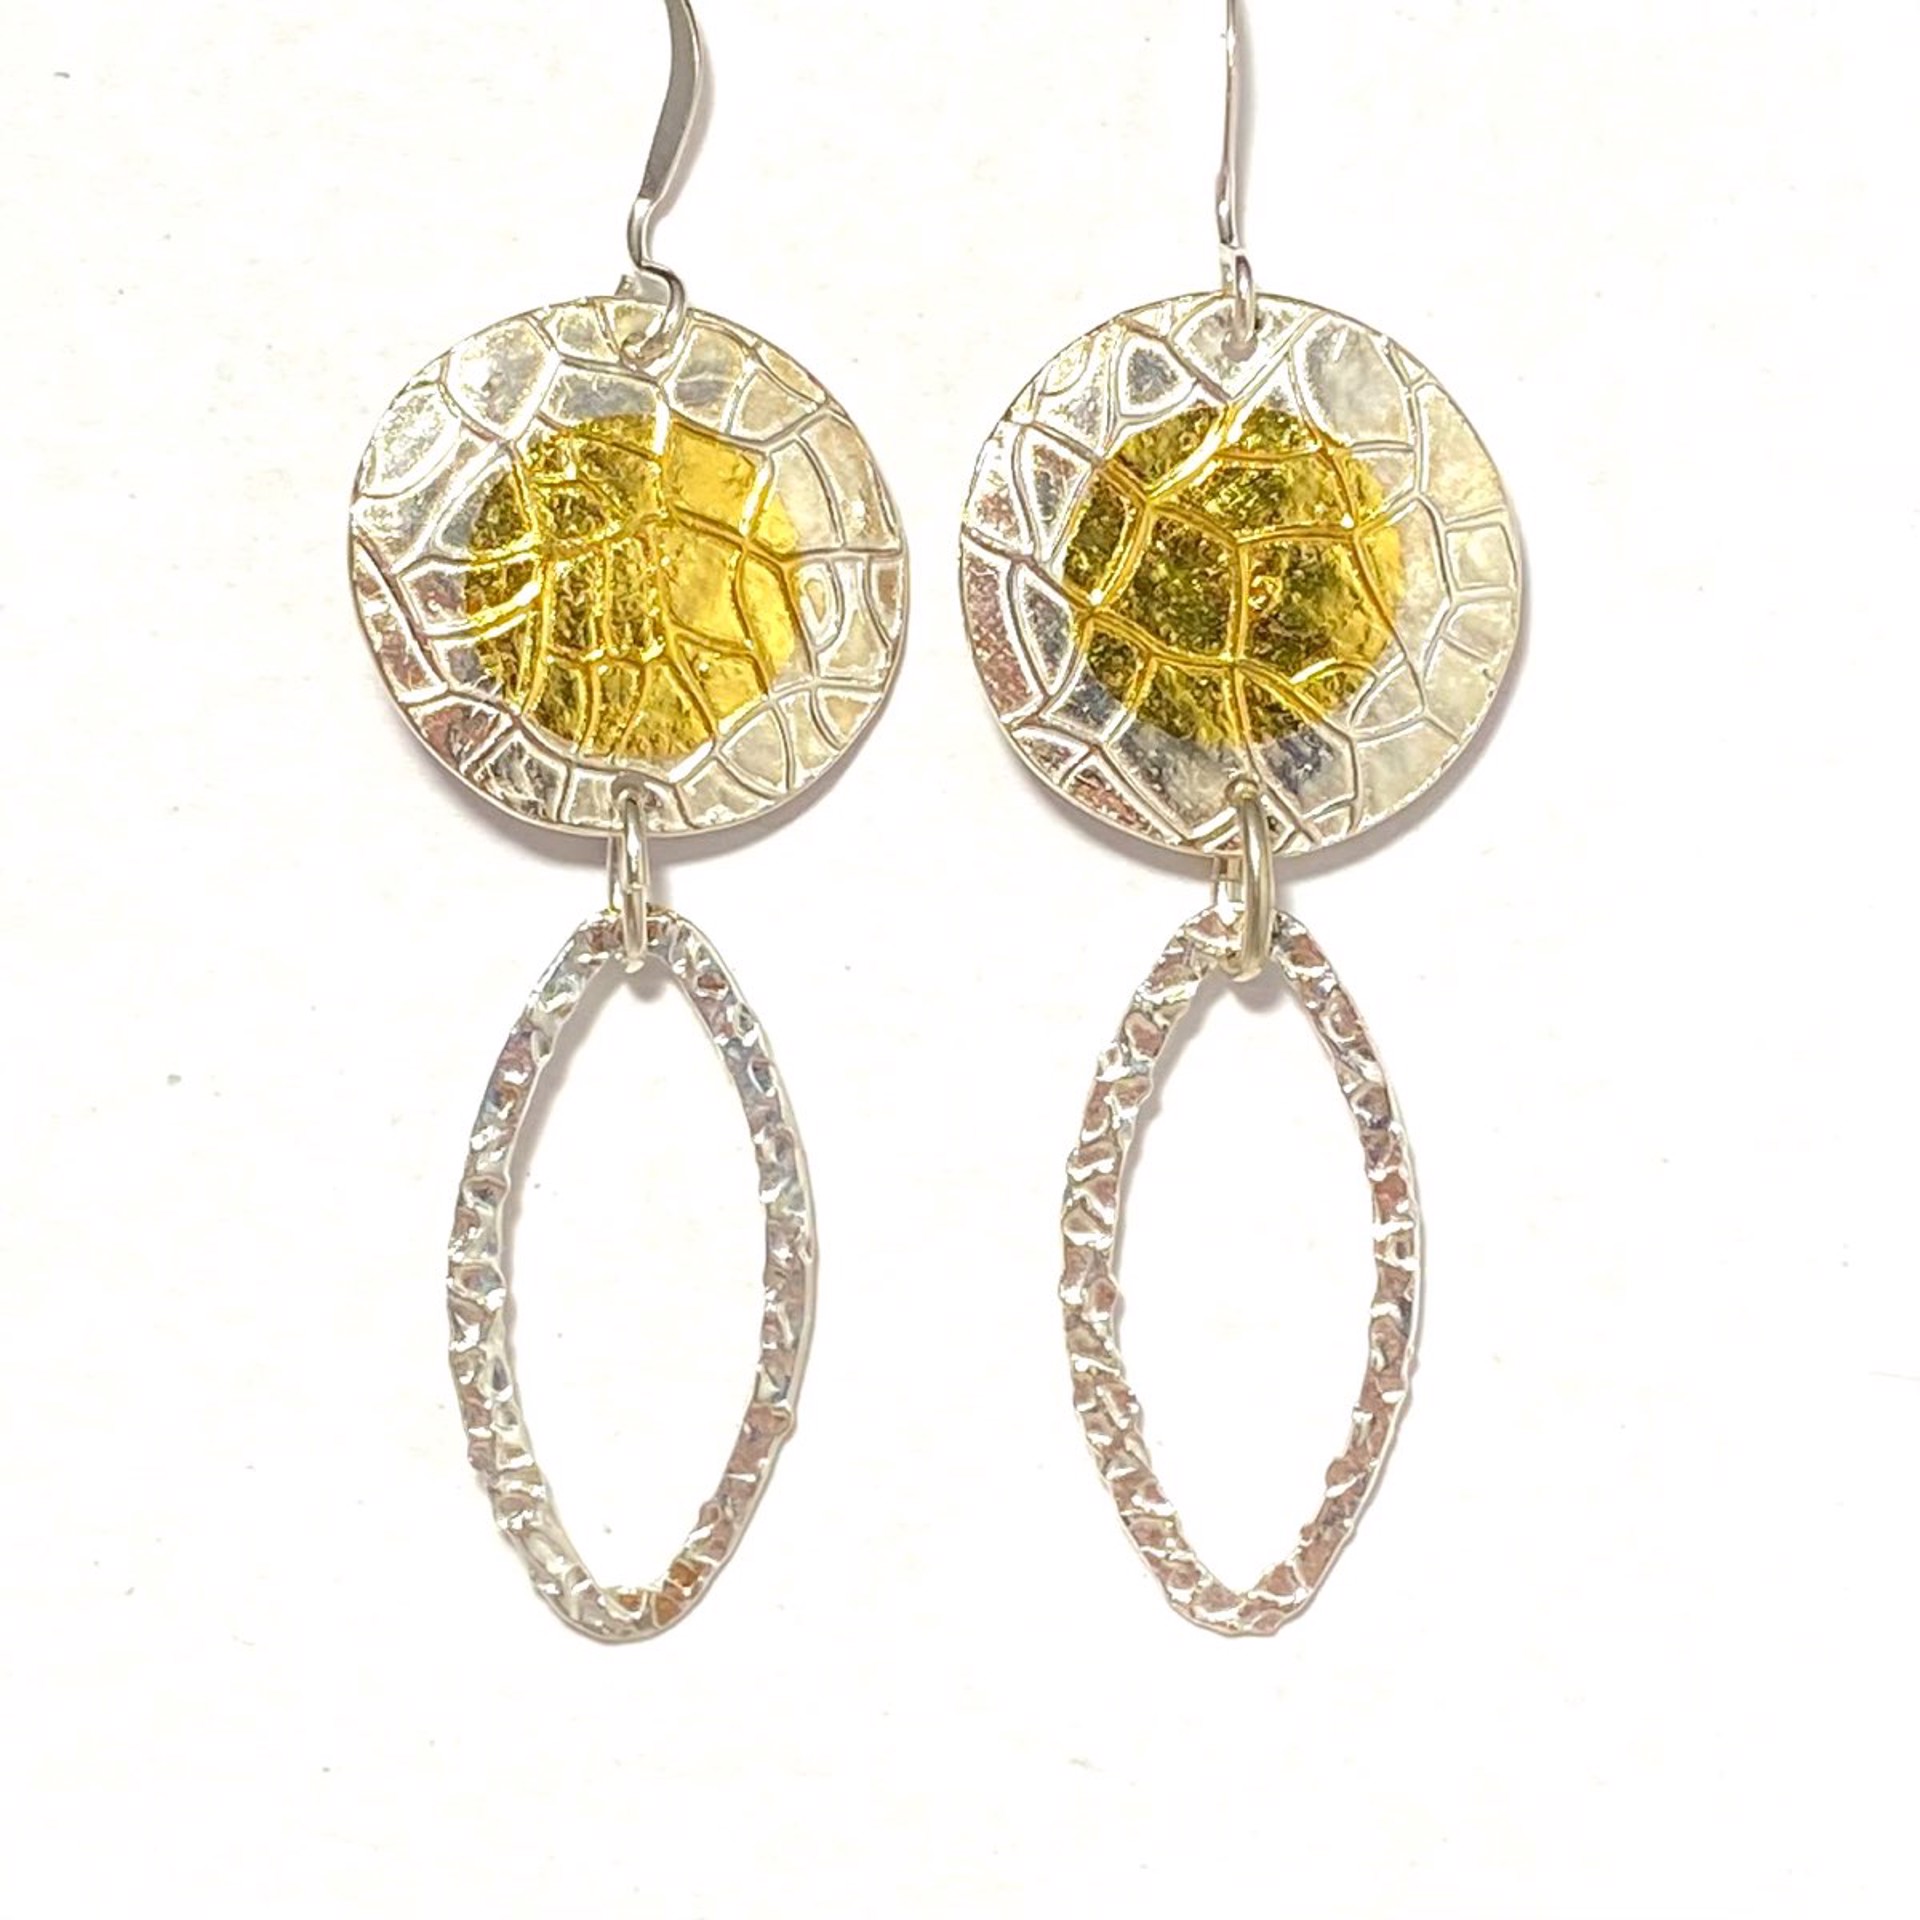 KH22-60 Keum-boo Fine Silver and Gold Circle Oval Dangle Earrings by Karen Hakim